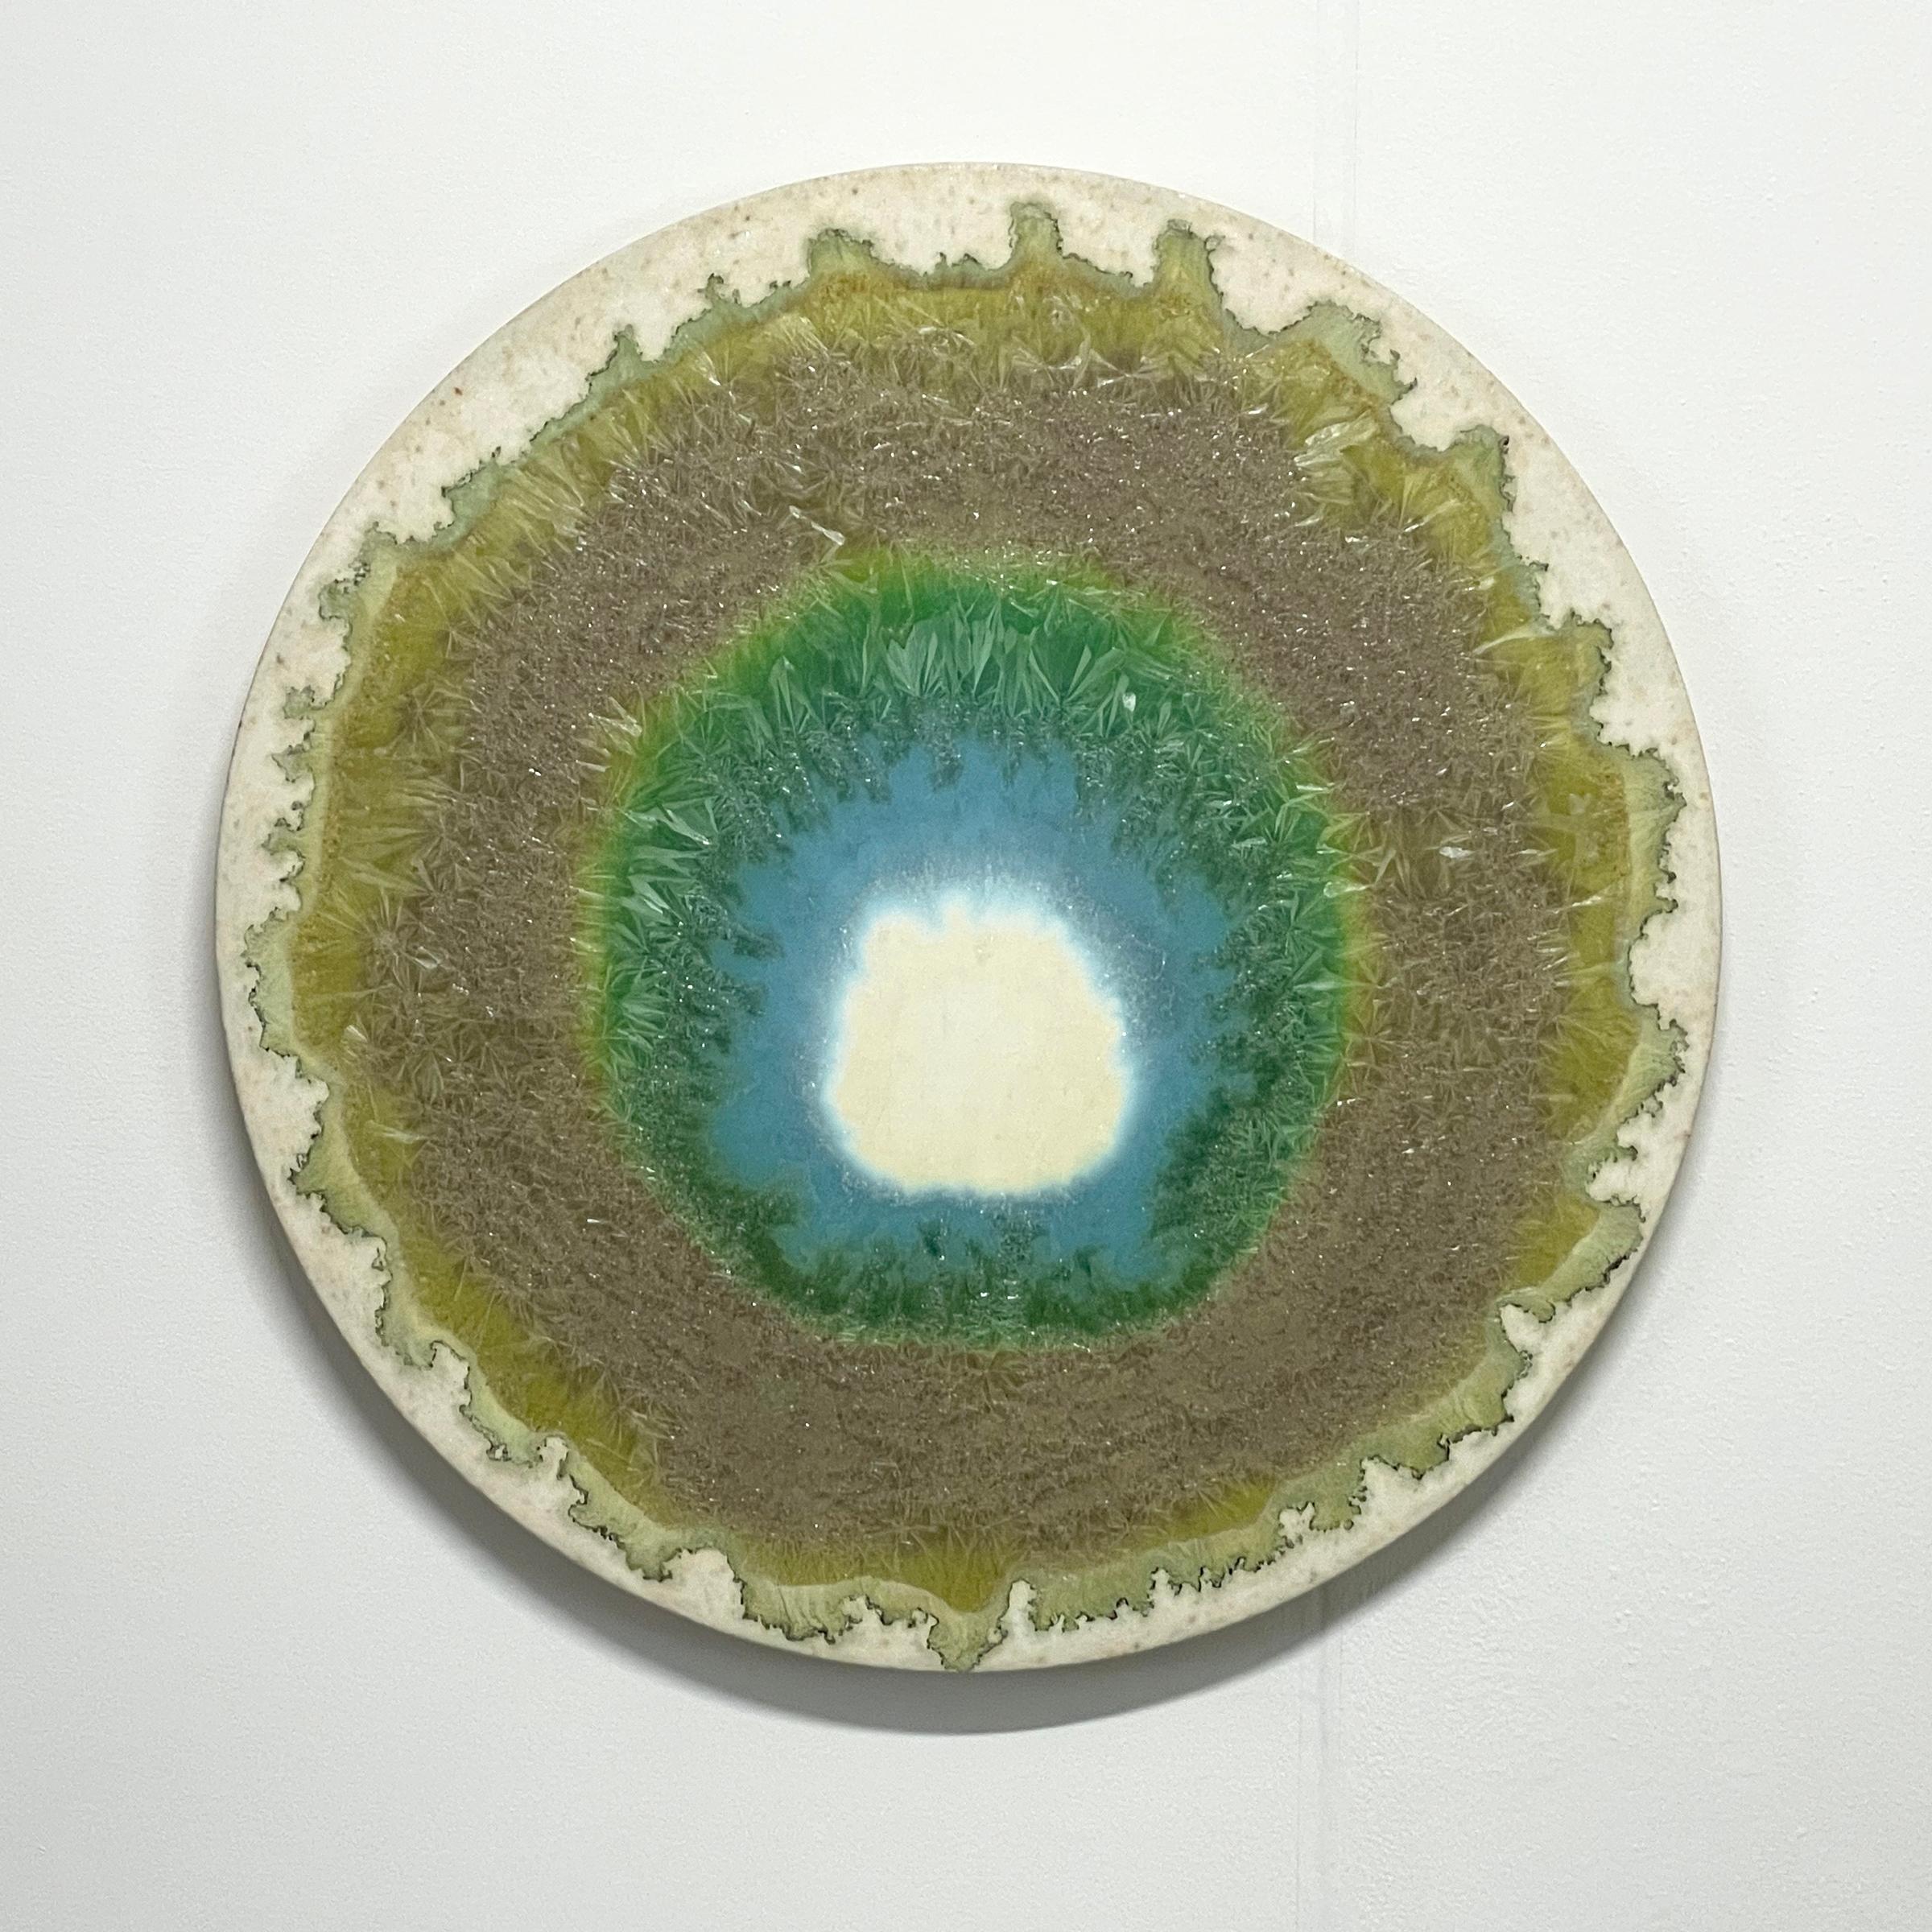 Blue Flame
Ceramic painting by William Edwards
Hand rolled earthenware circular slab with crystalline glaze. 

William received his BFA in sculpture from the historic San Francisco Art Institute and his MFA from UC Davis. William produces hand made,